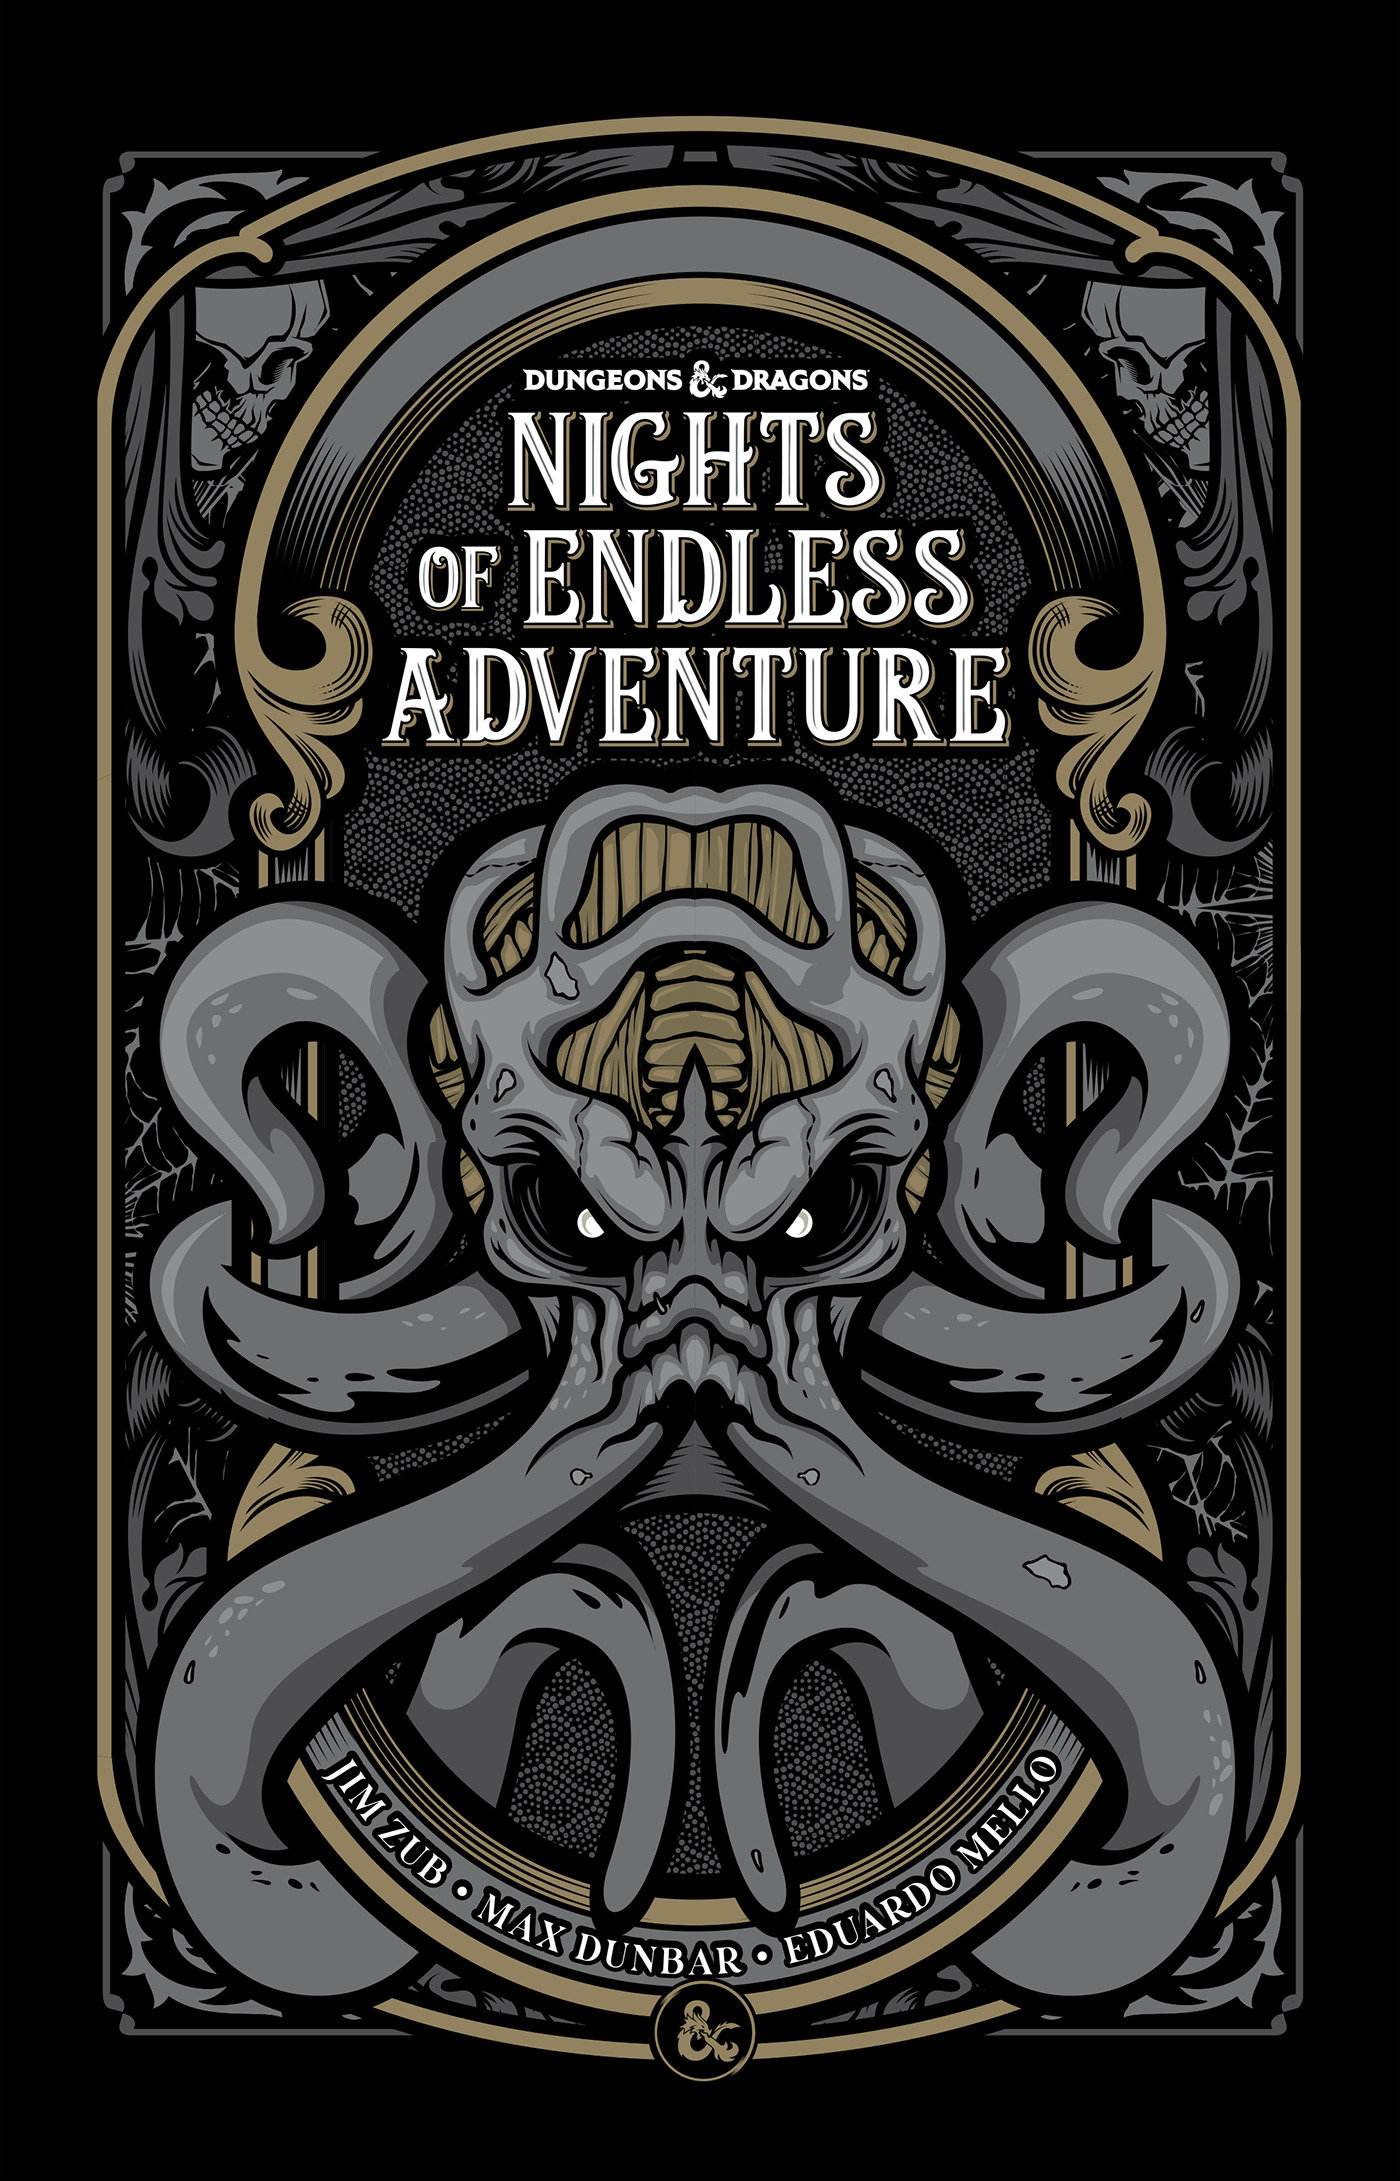 Dungeons & Dragons: Nights of Endless Adventure Graphic Novel